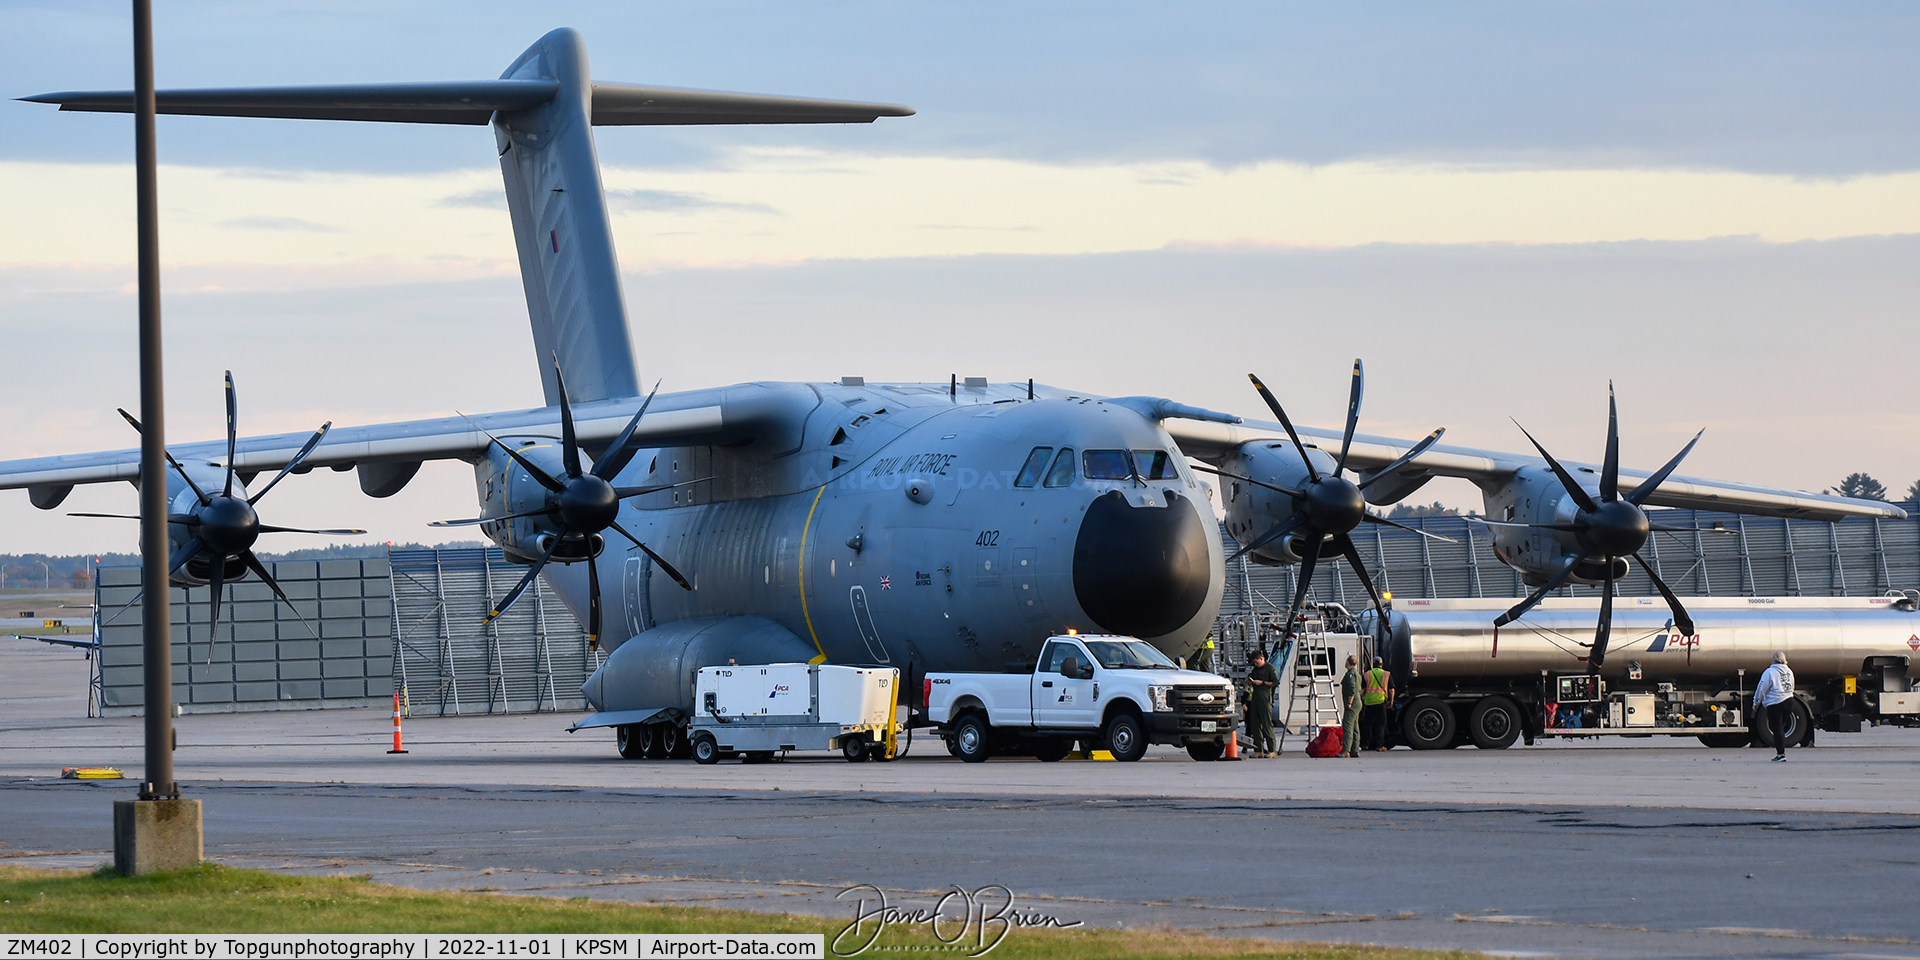 ZM402, 2014 Airbus A400M Atlas C.1 C/N 017, topping her off before putting her to bed.